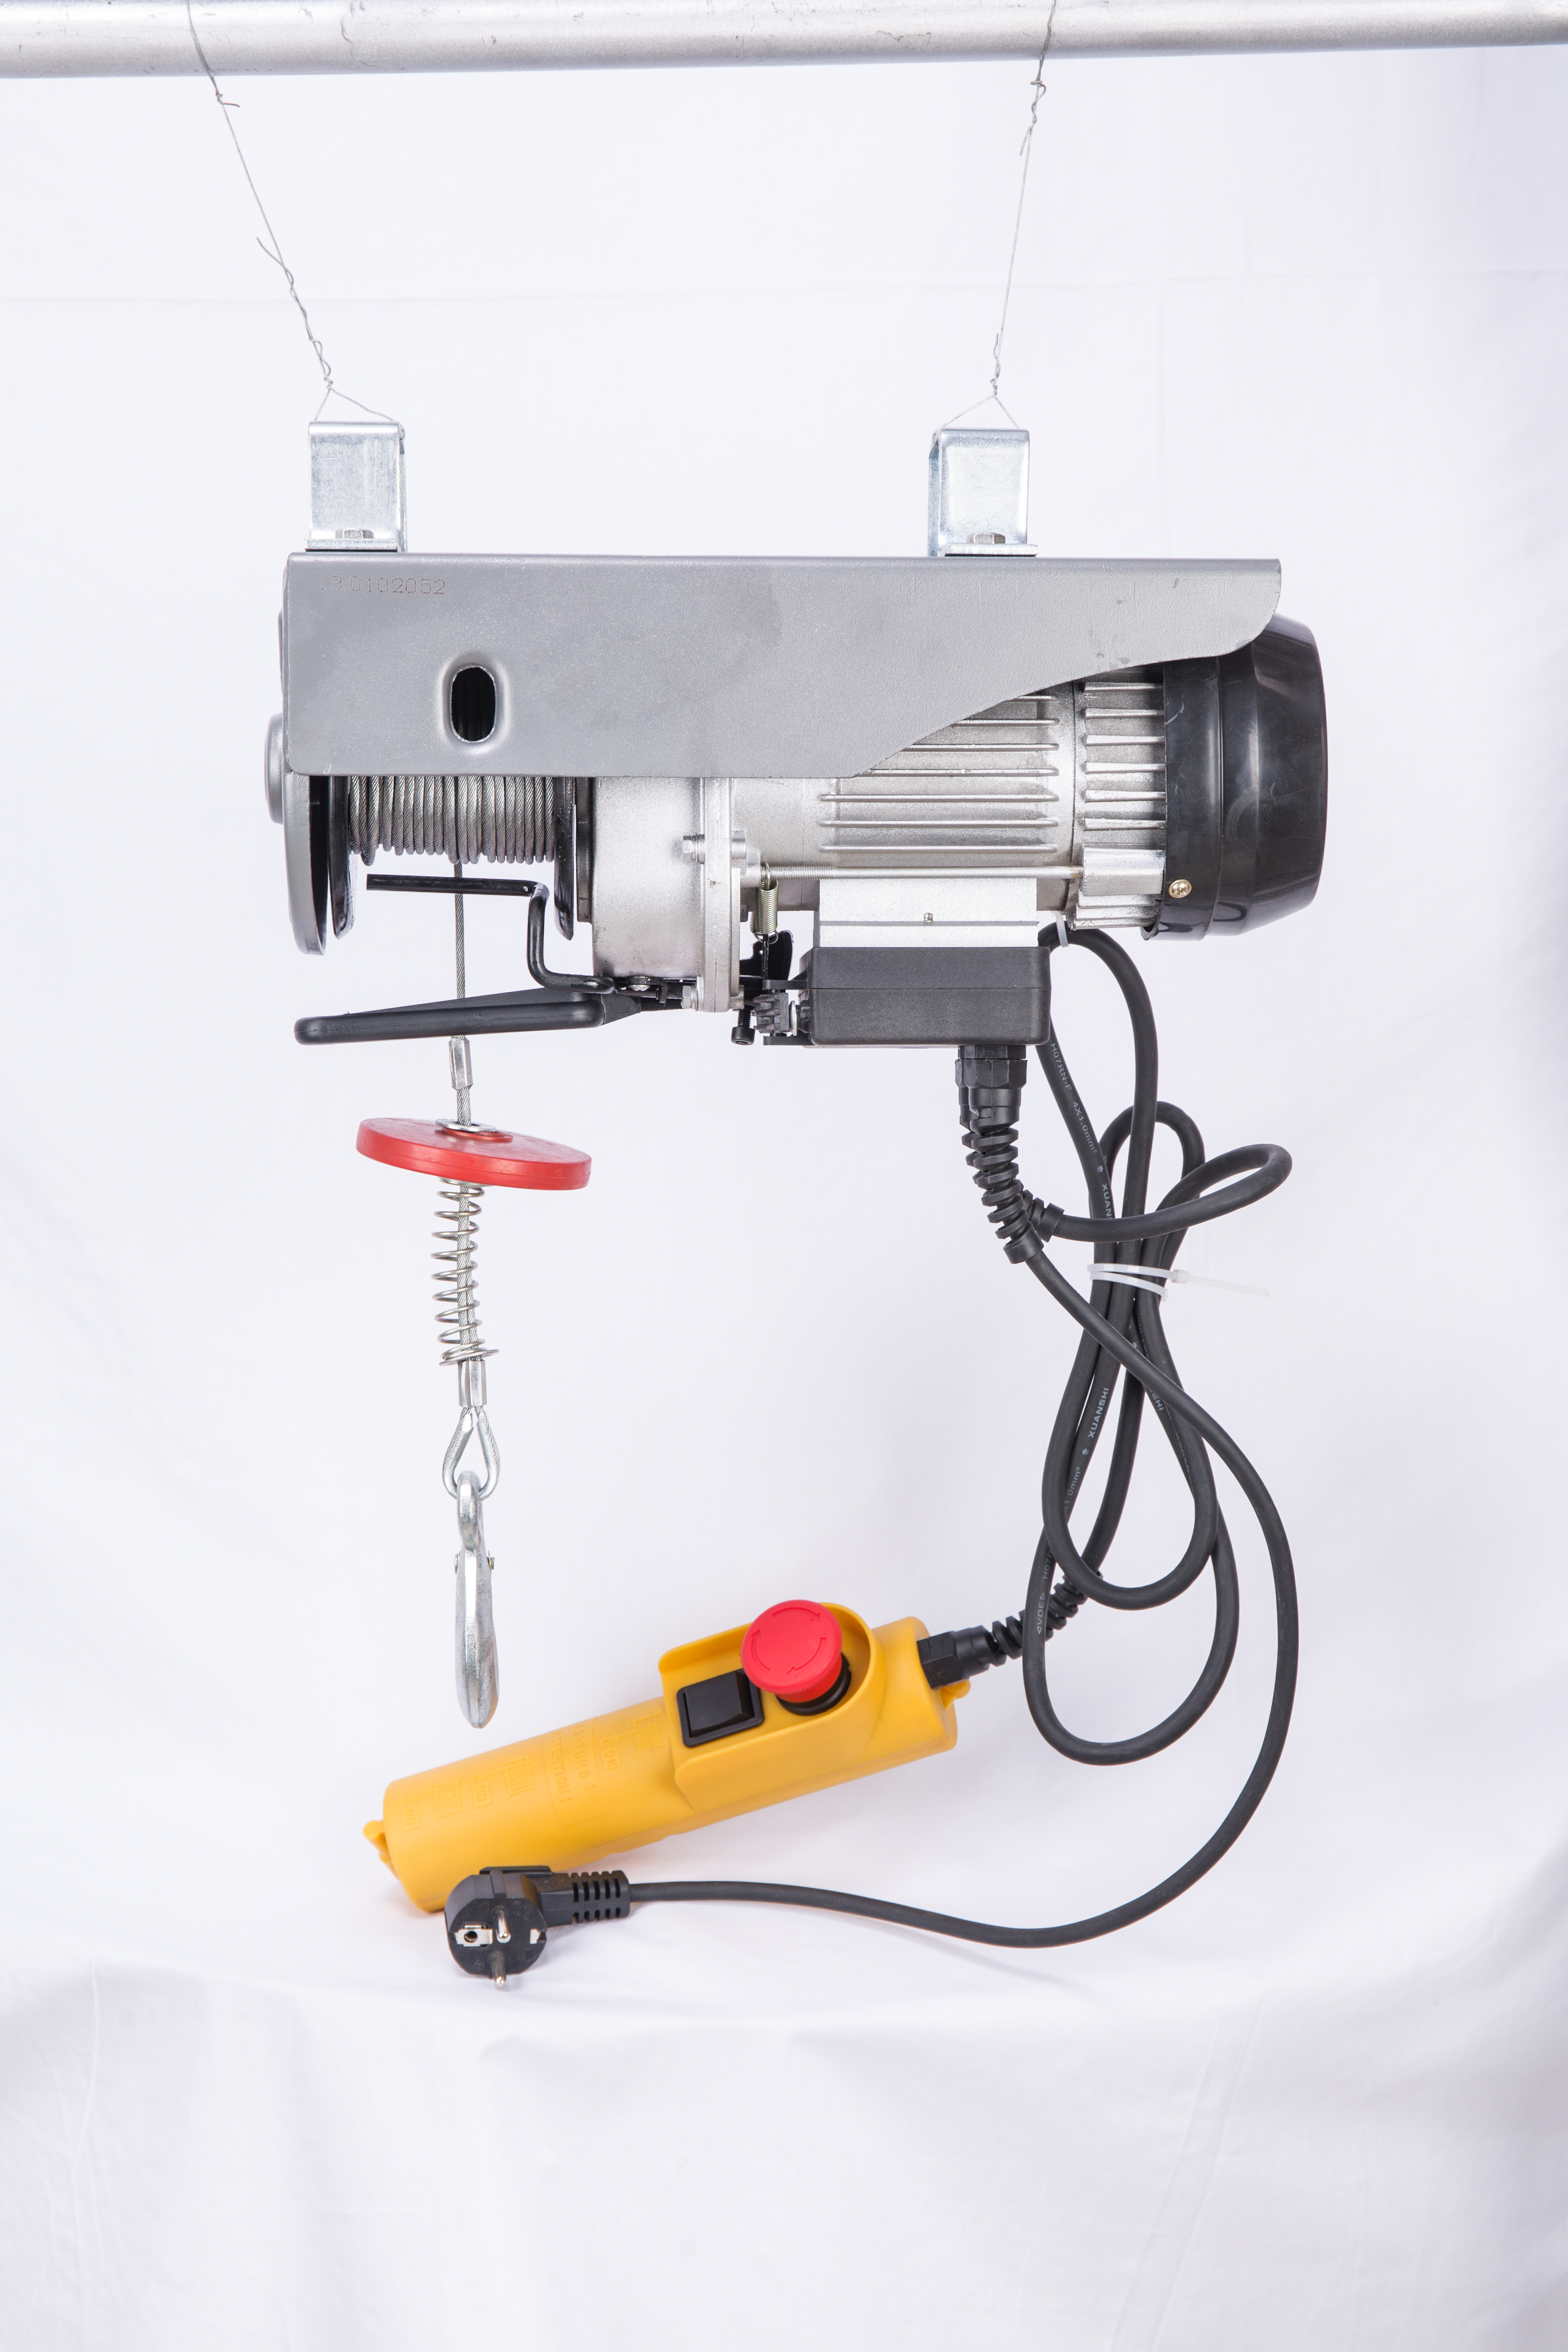 PA 500 micro electric hoist Featured Image